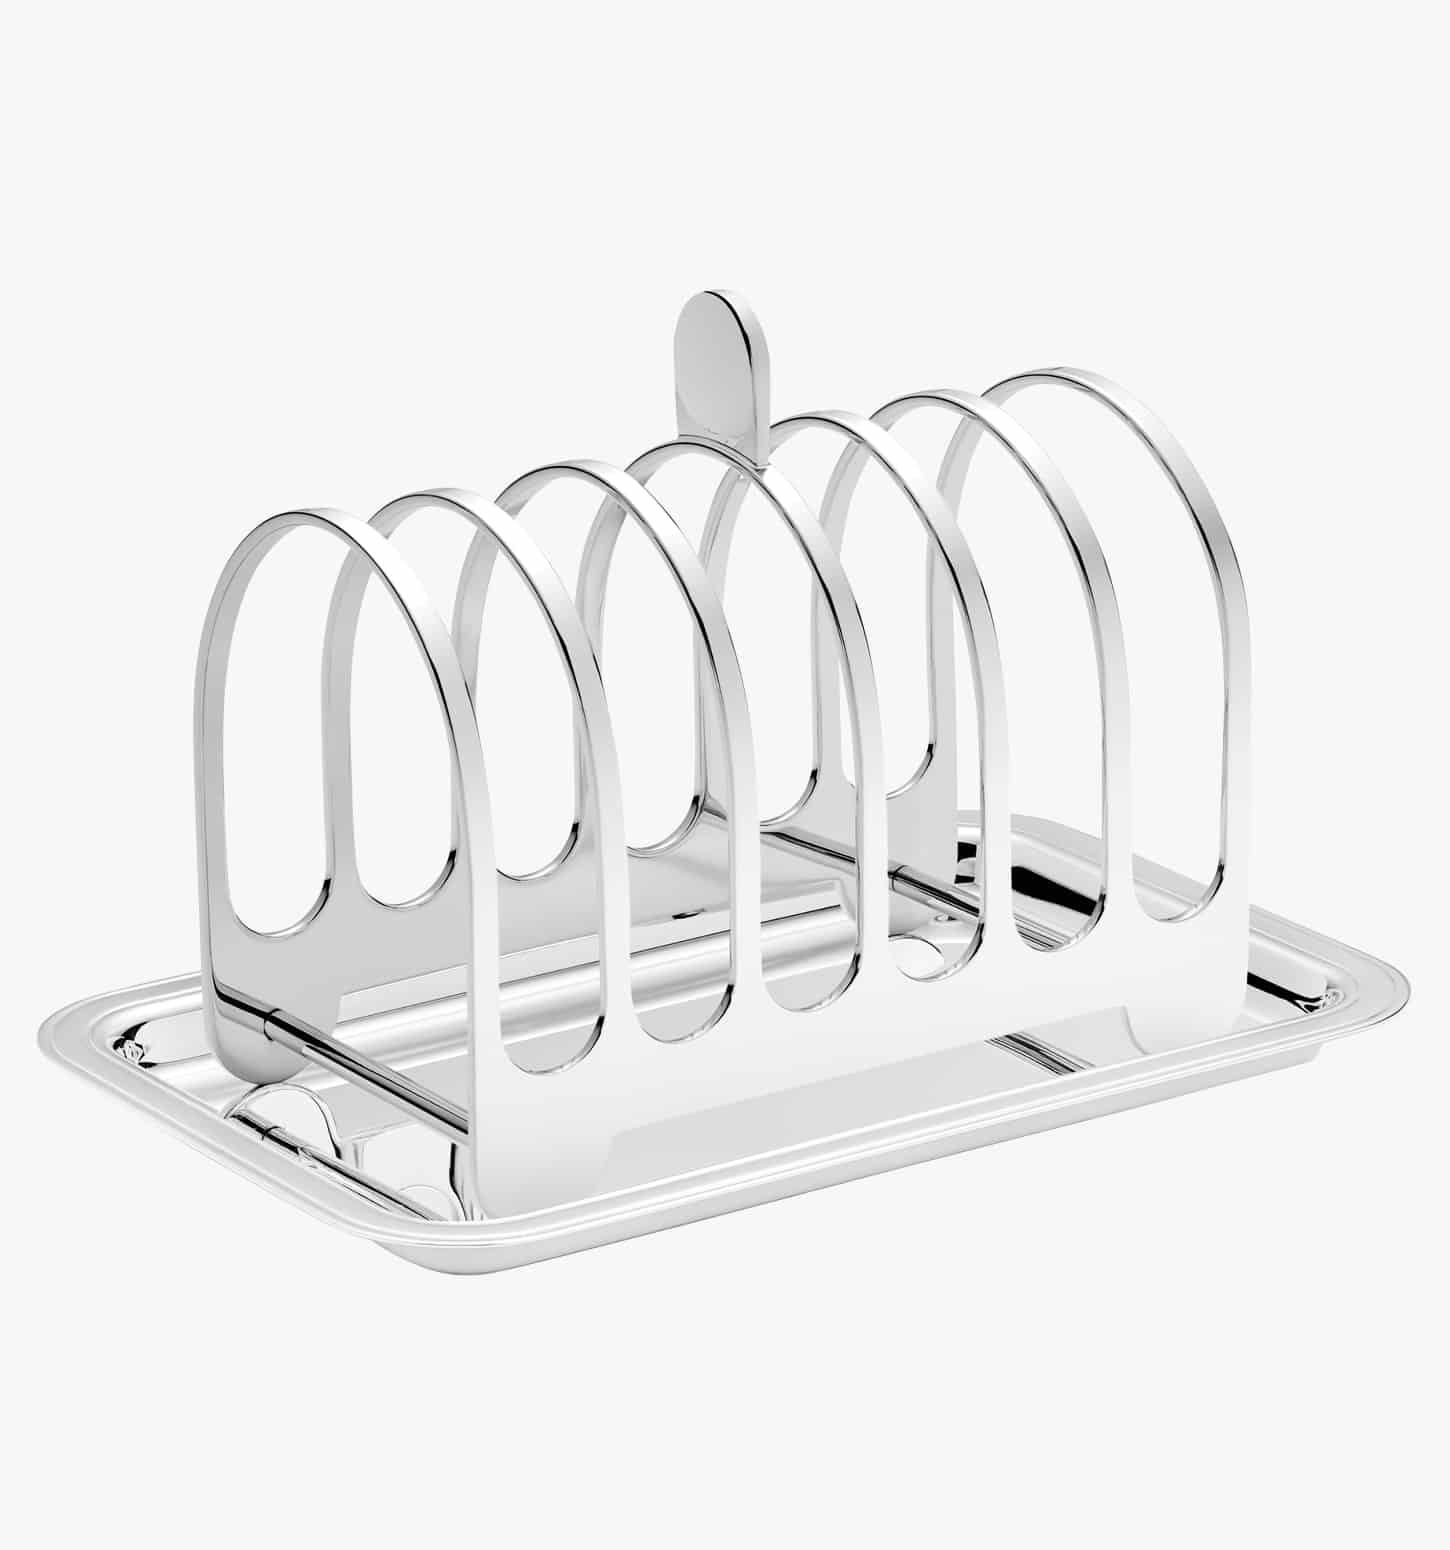 Toast holder in silver plated from Normandie collection from Puiforcat